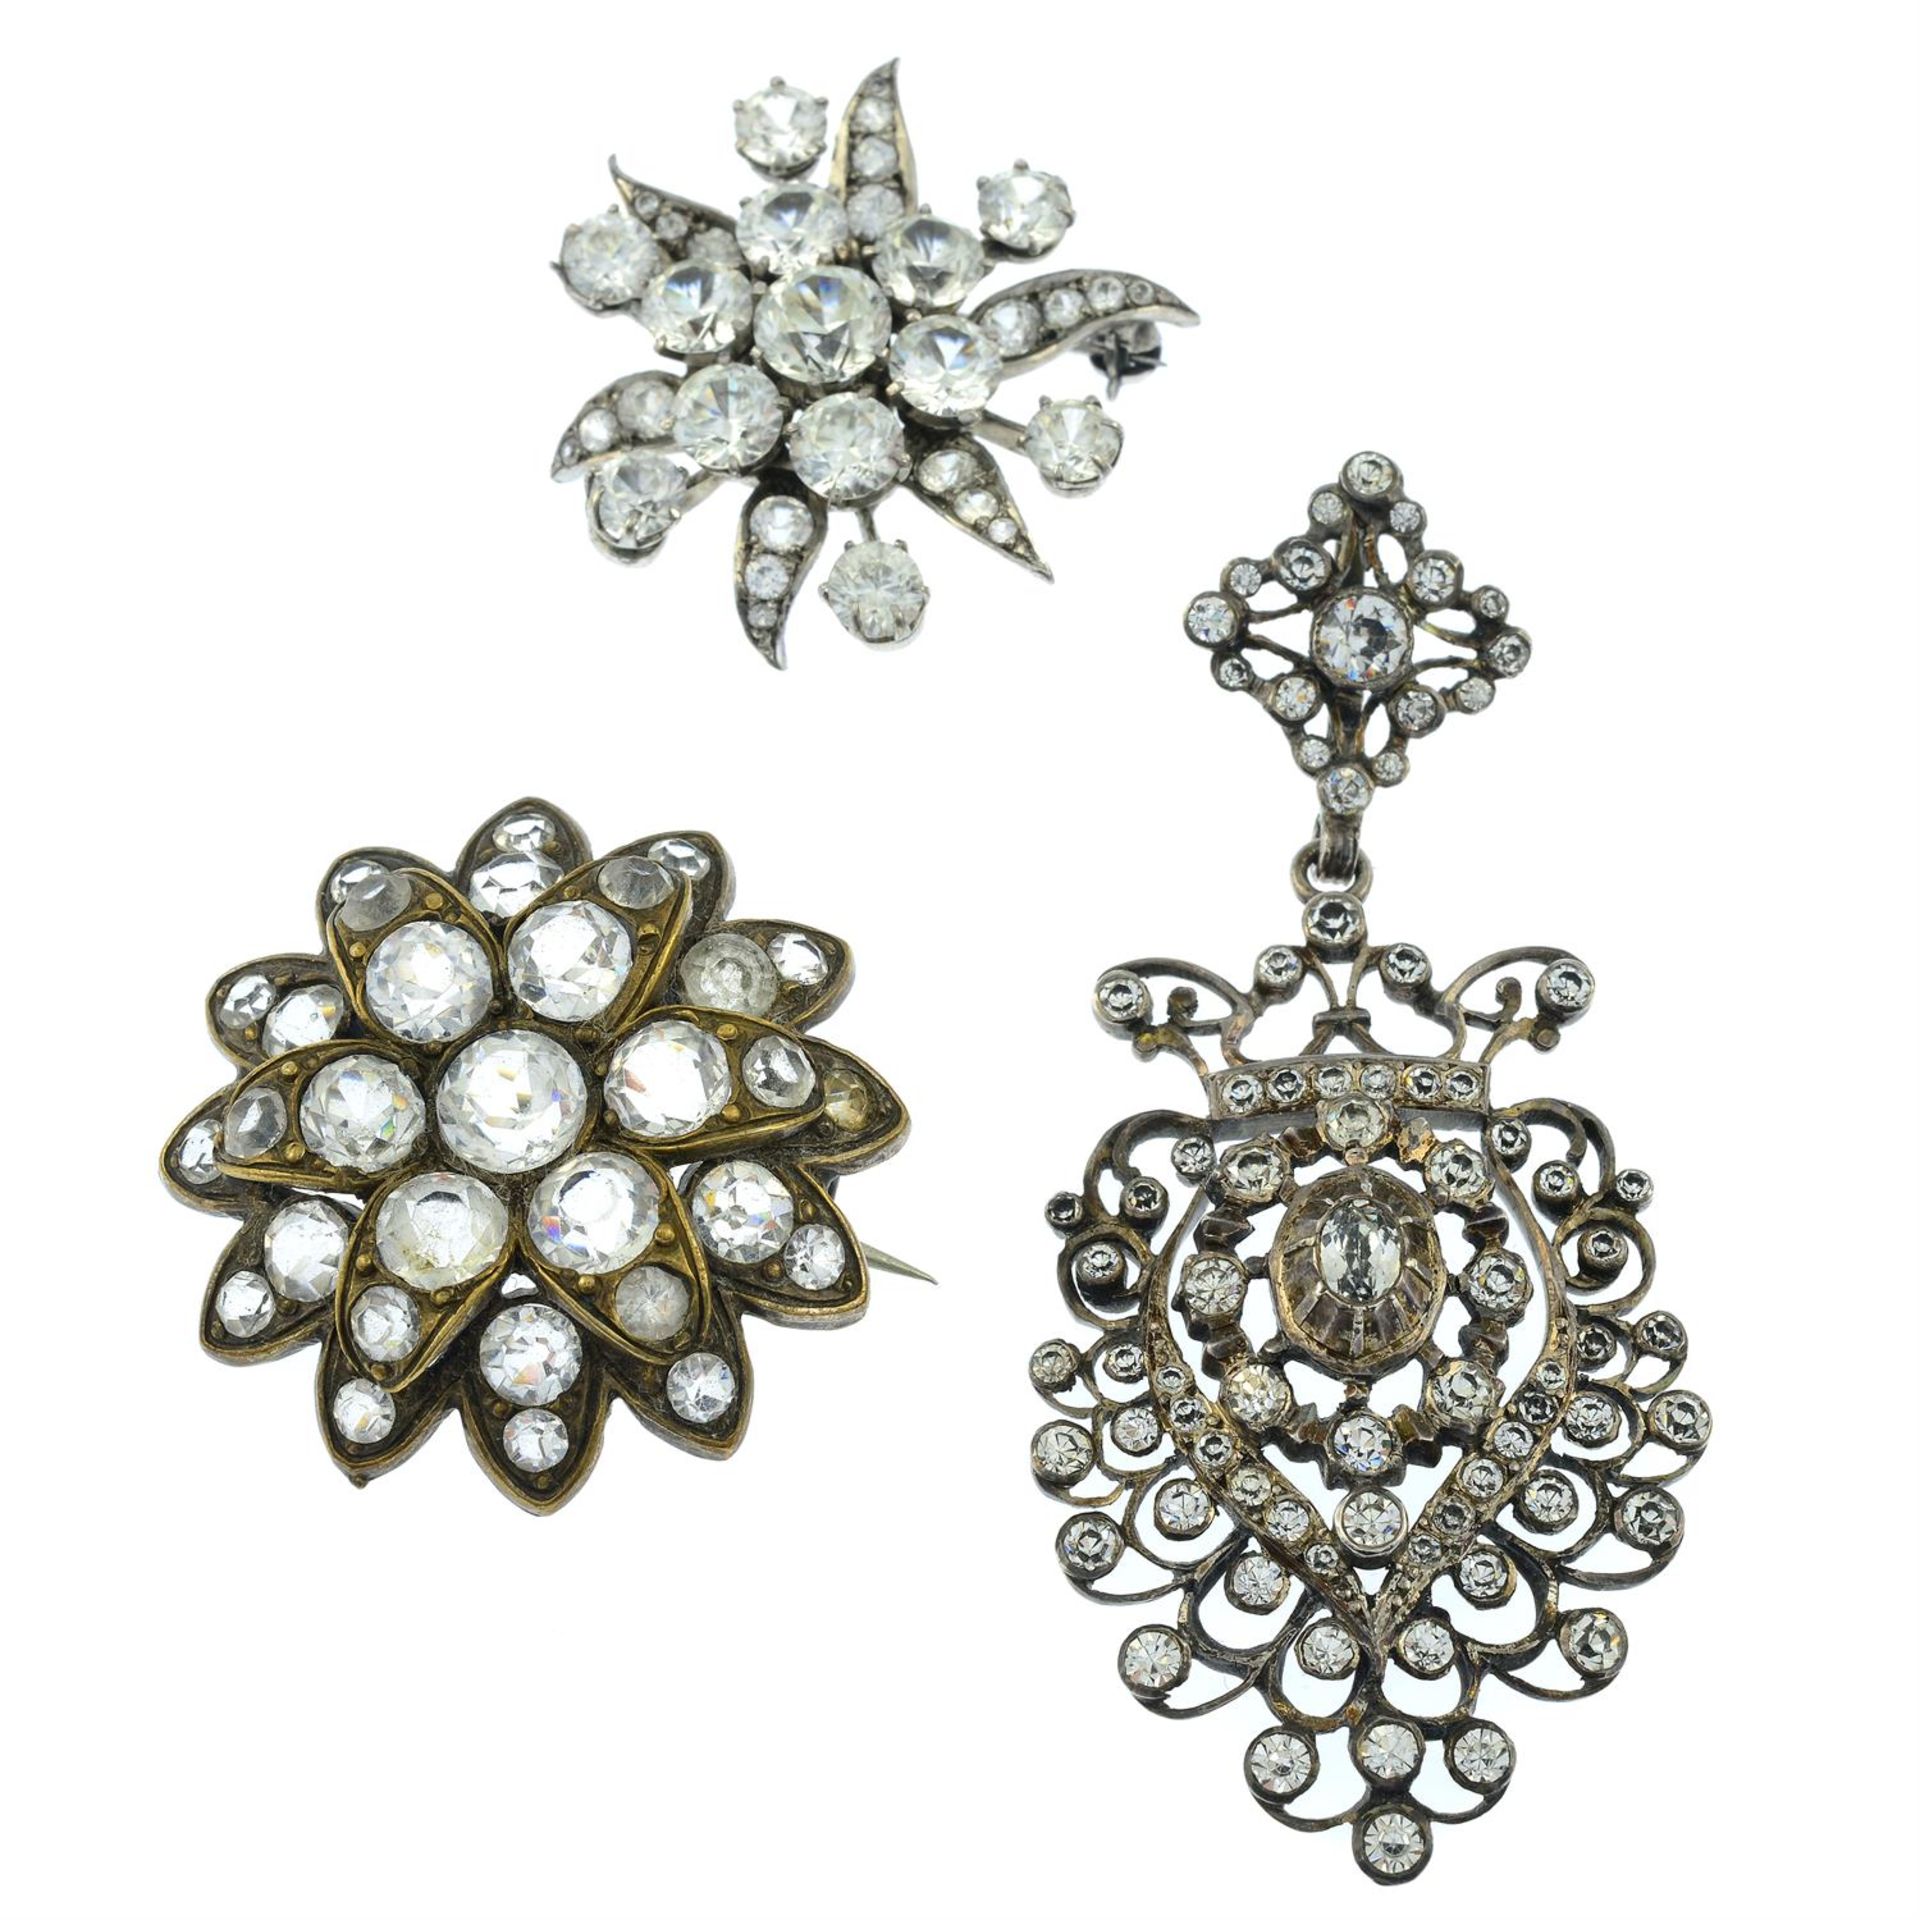 Three late 19th Century paste set brooches.